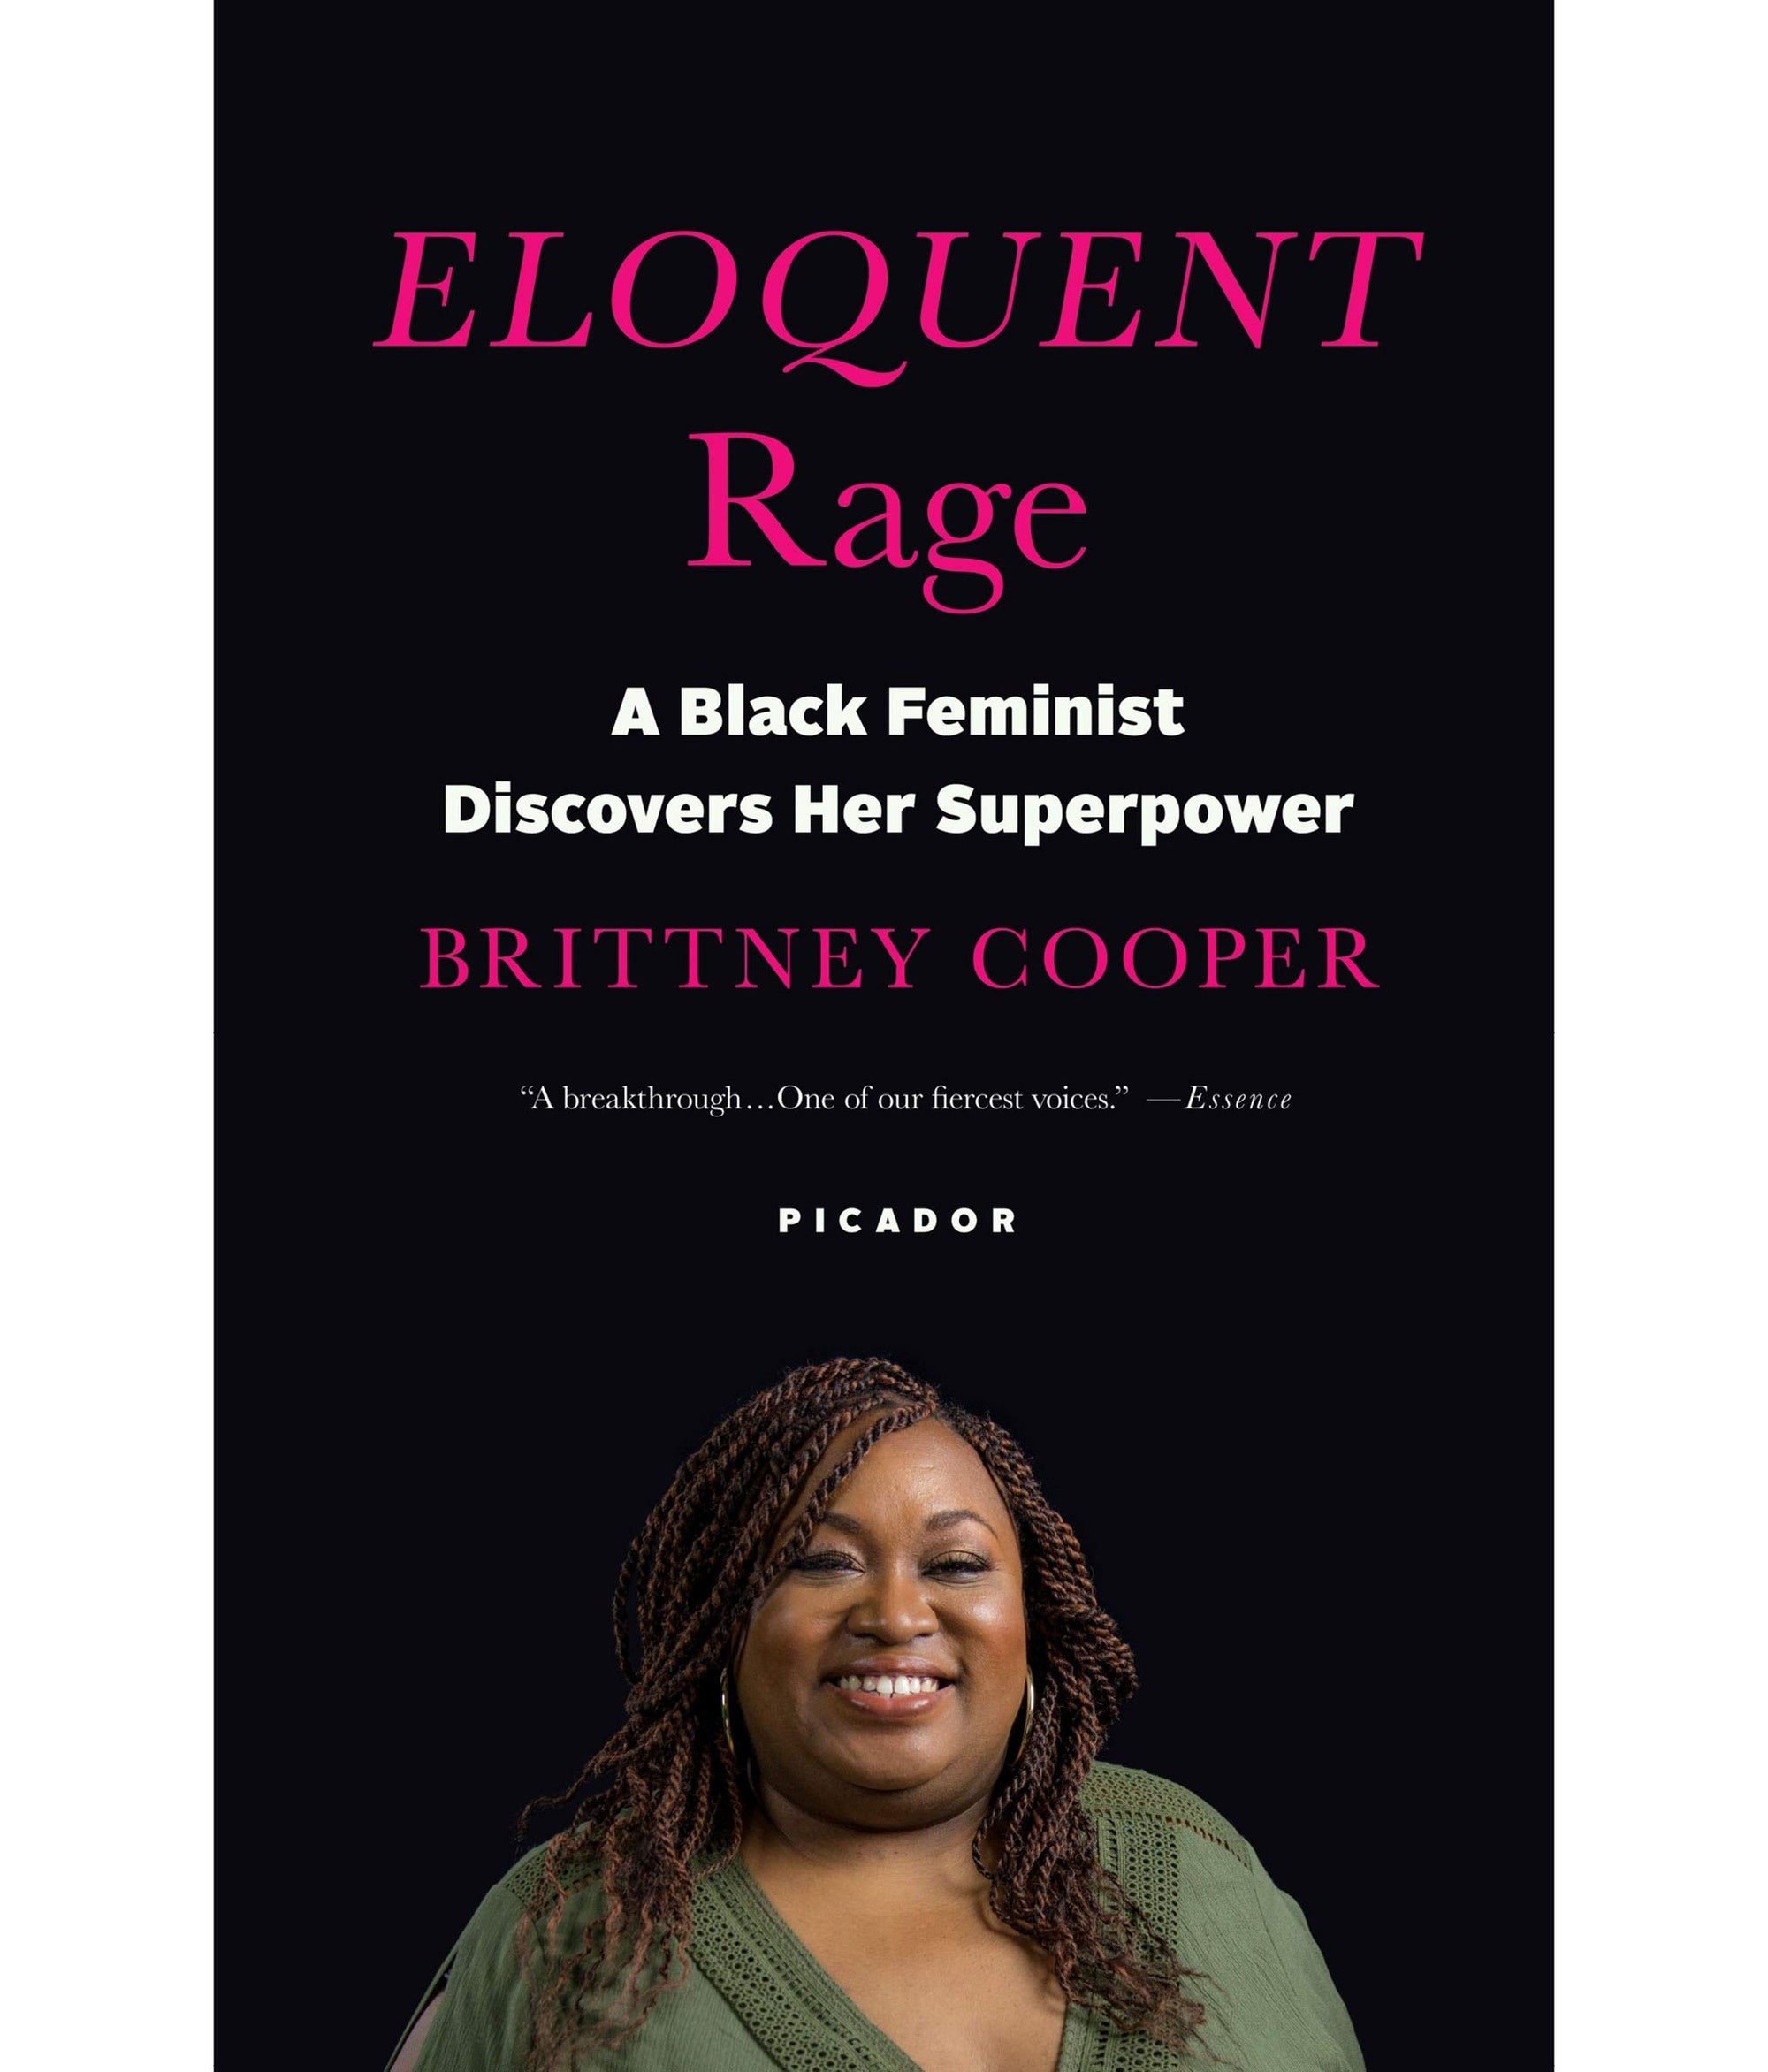 Eloquent Rage: A black feminist discovers her superpower by Brittney Cooper